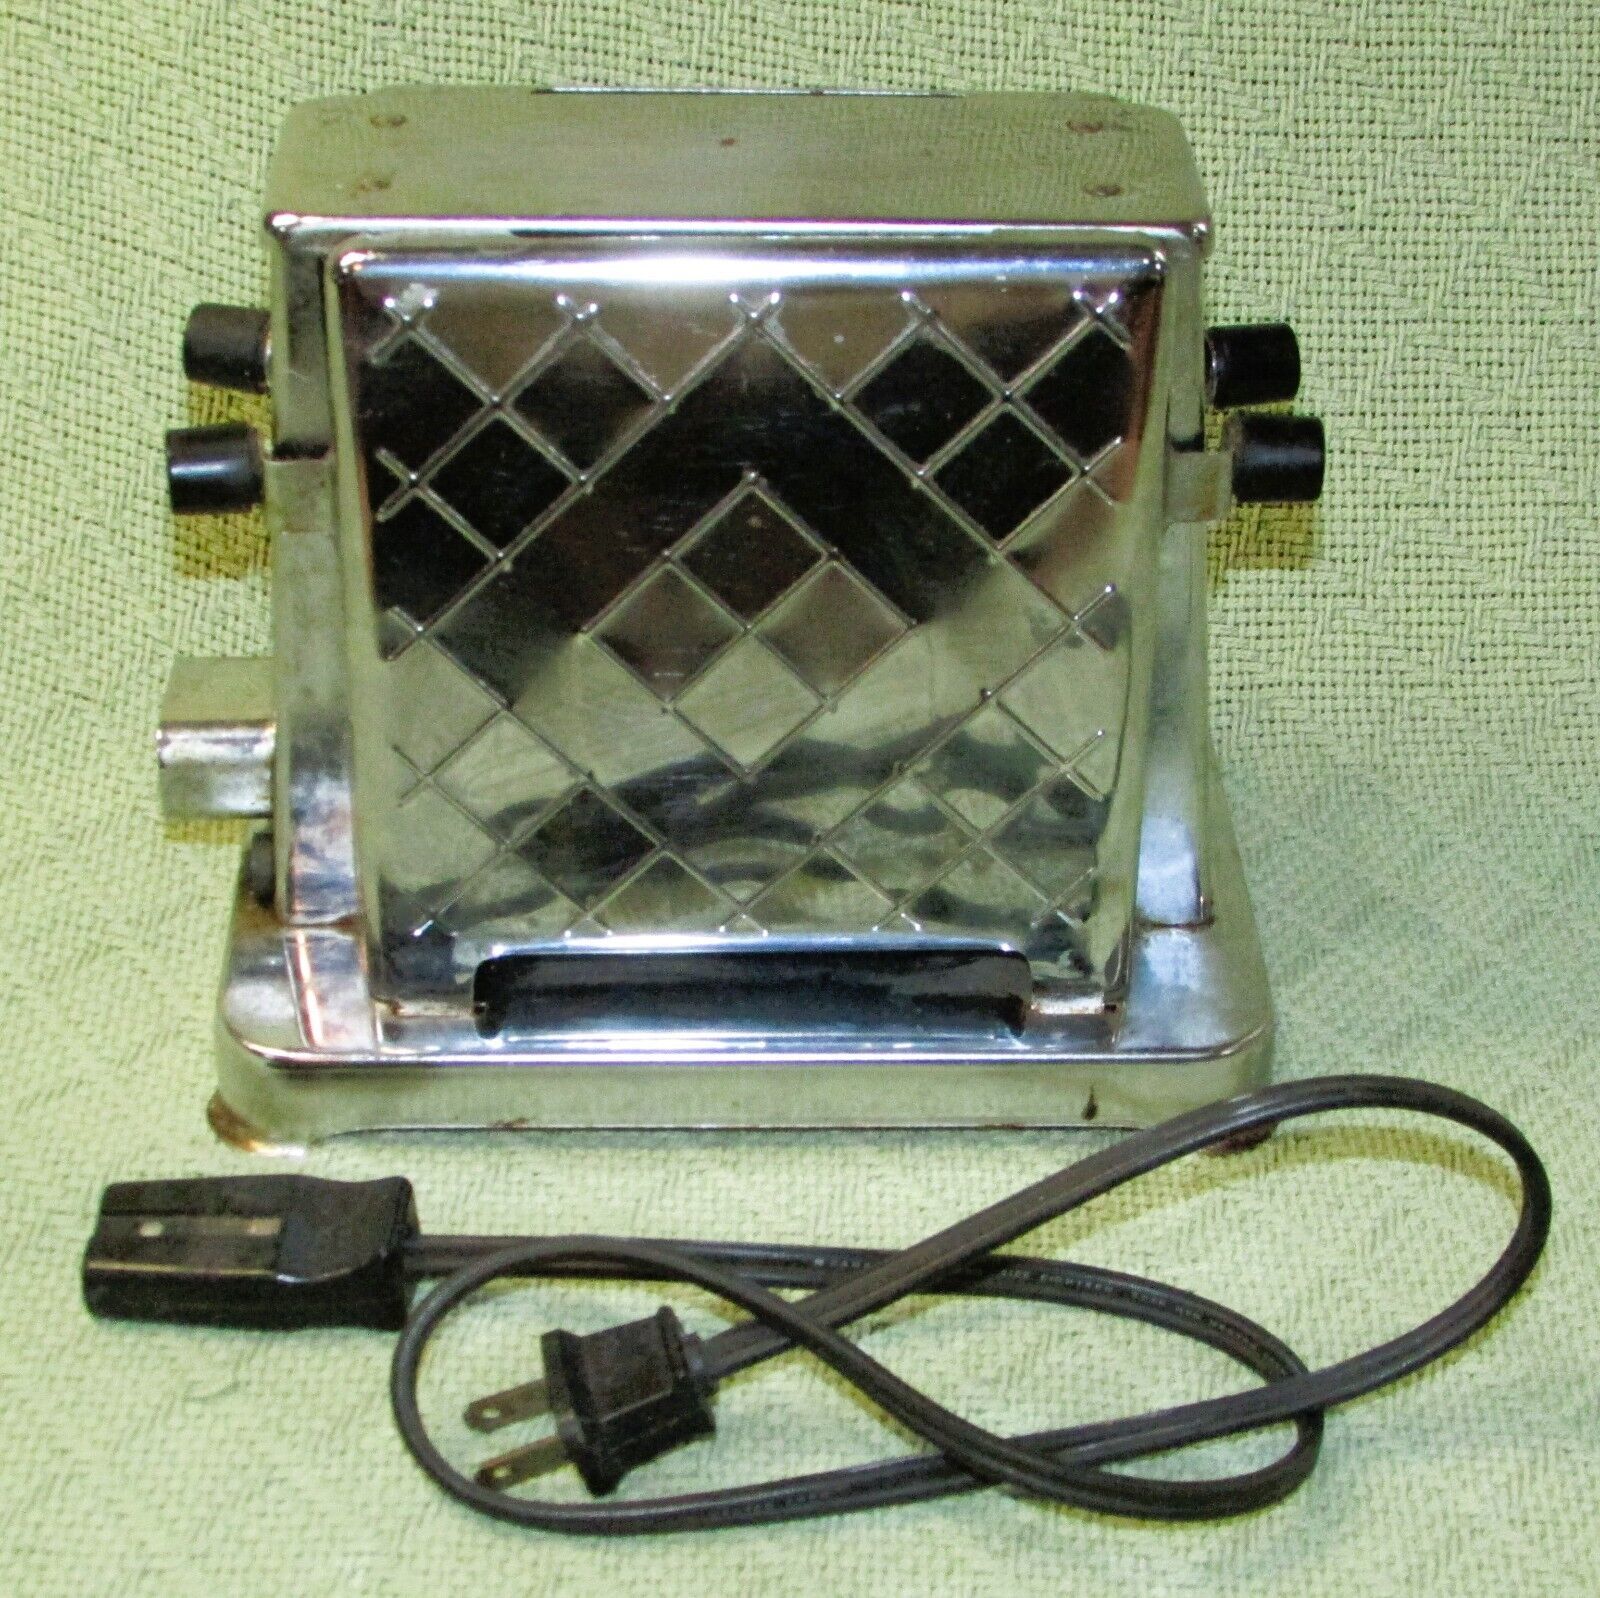 TOASTESS 2 SIDED ELECTRIC TOASTER 1940s MONTREAL CANADA GENERAL ELECTRIC VINTAGE - £28.02 GBP